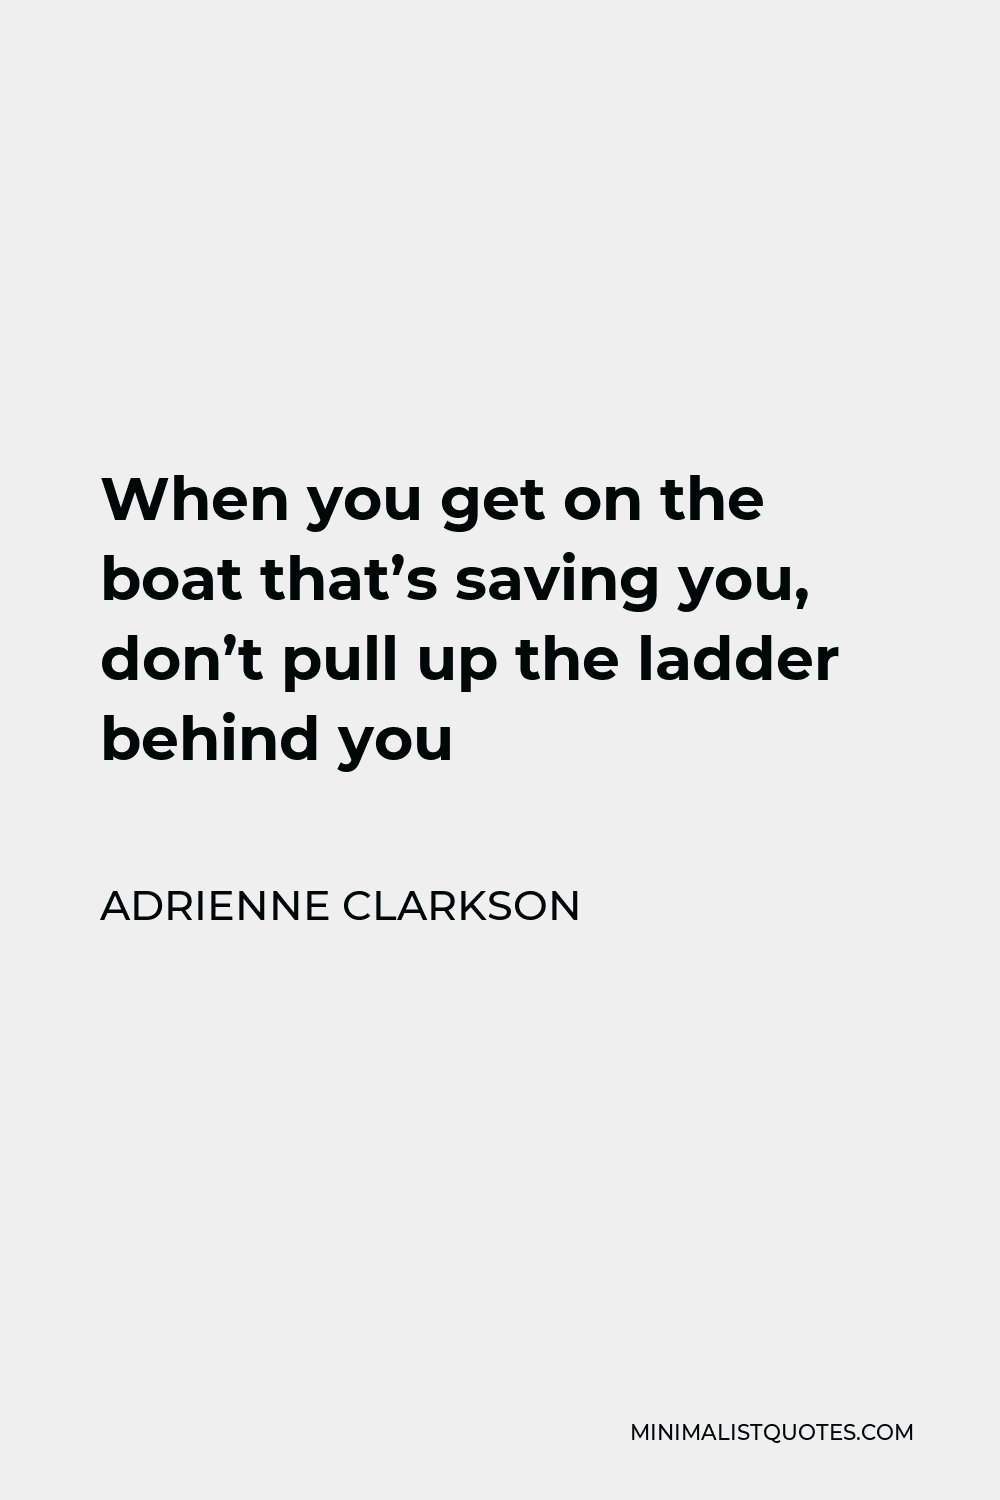 Adrienne Clarkson Quote - When you get on the boat that’s saving you, don’t pull up the ladder behind you